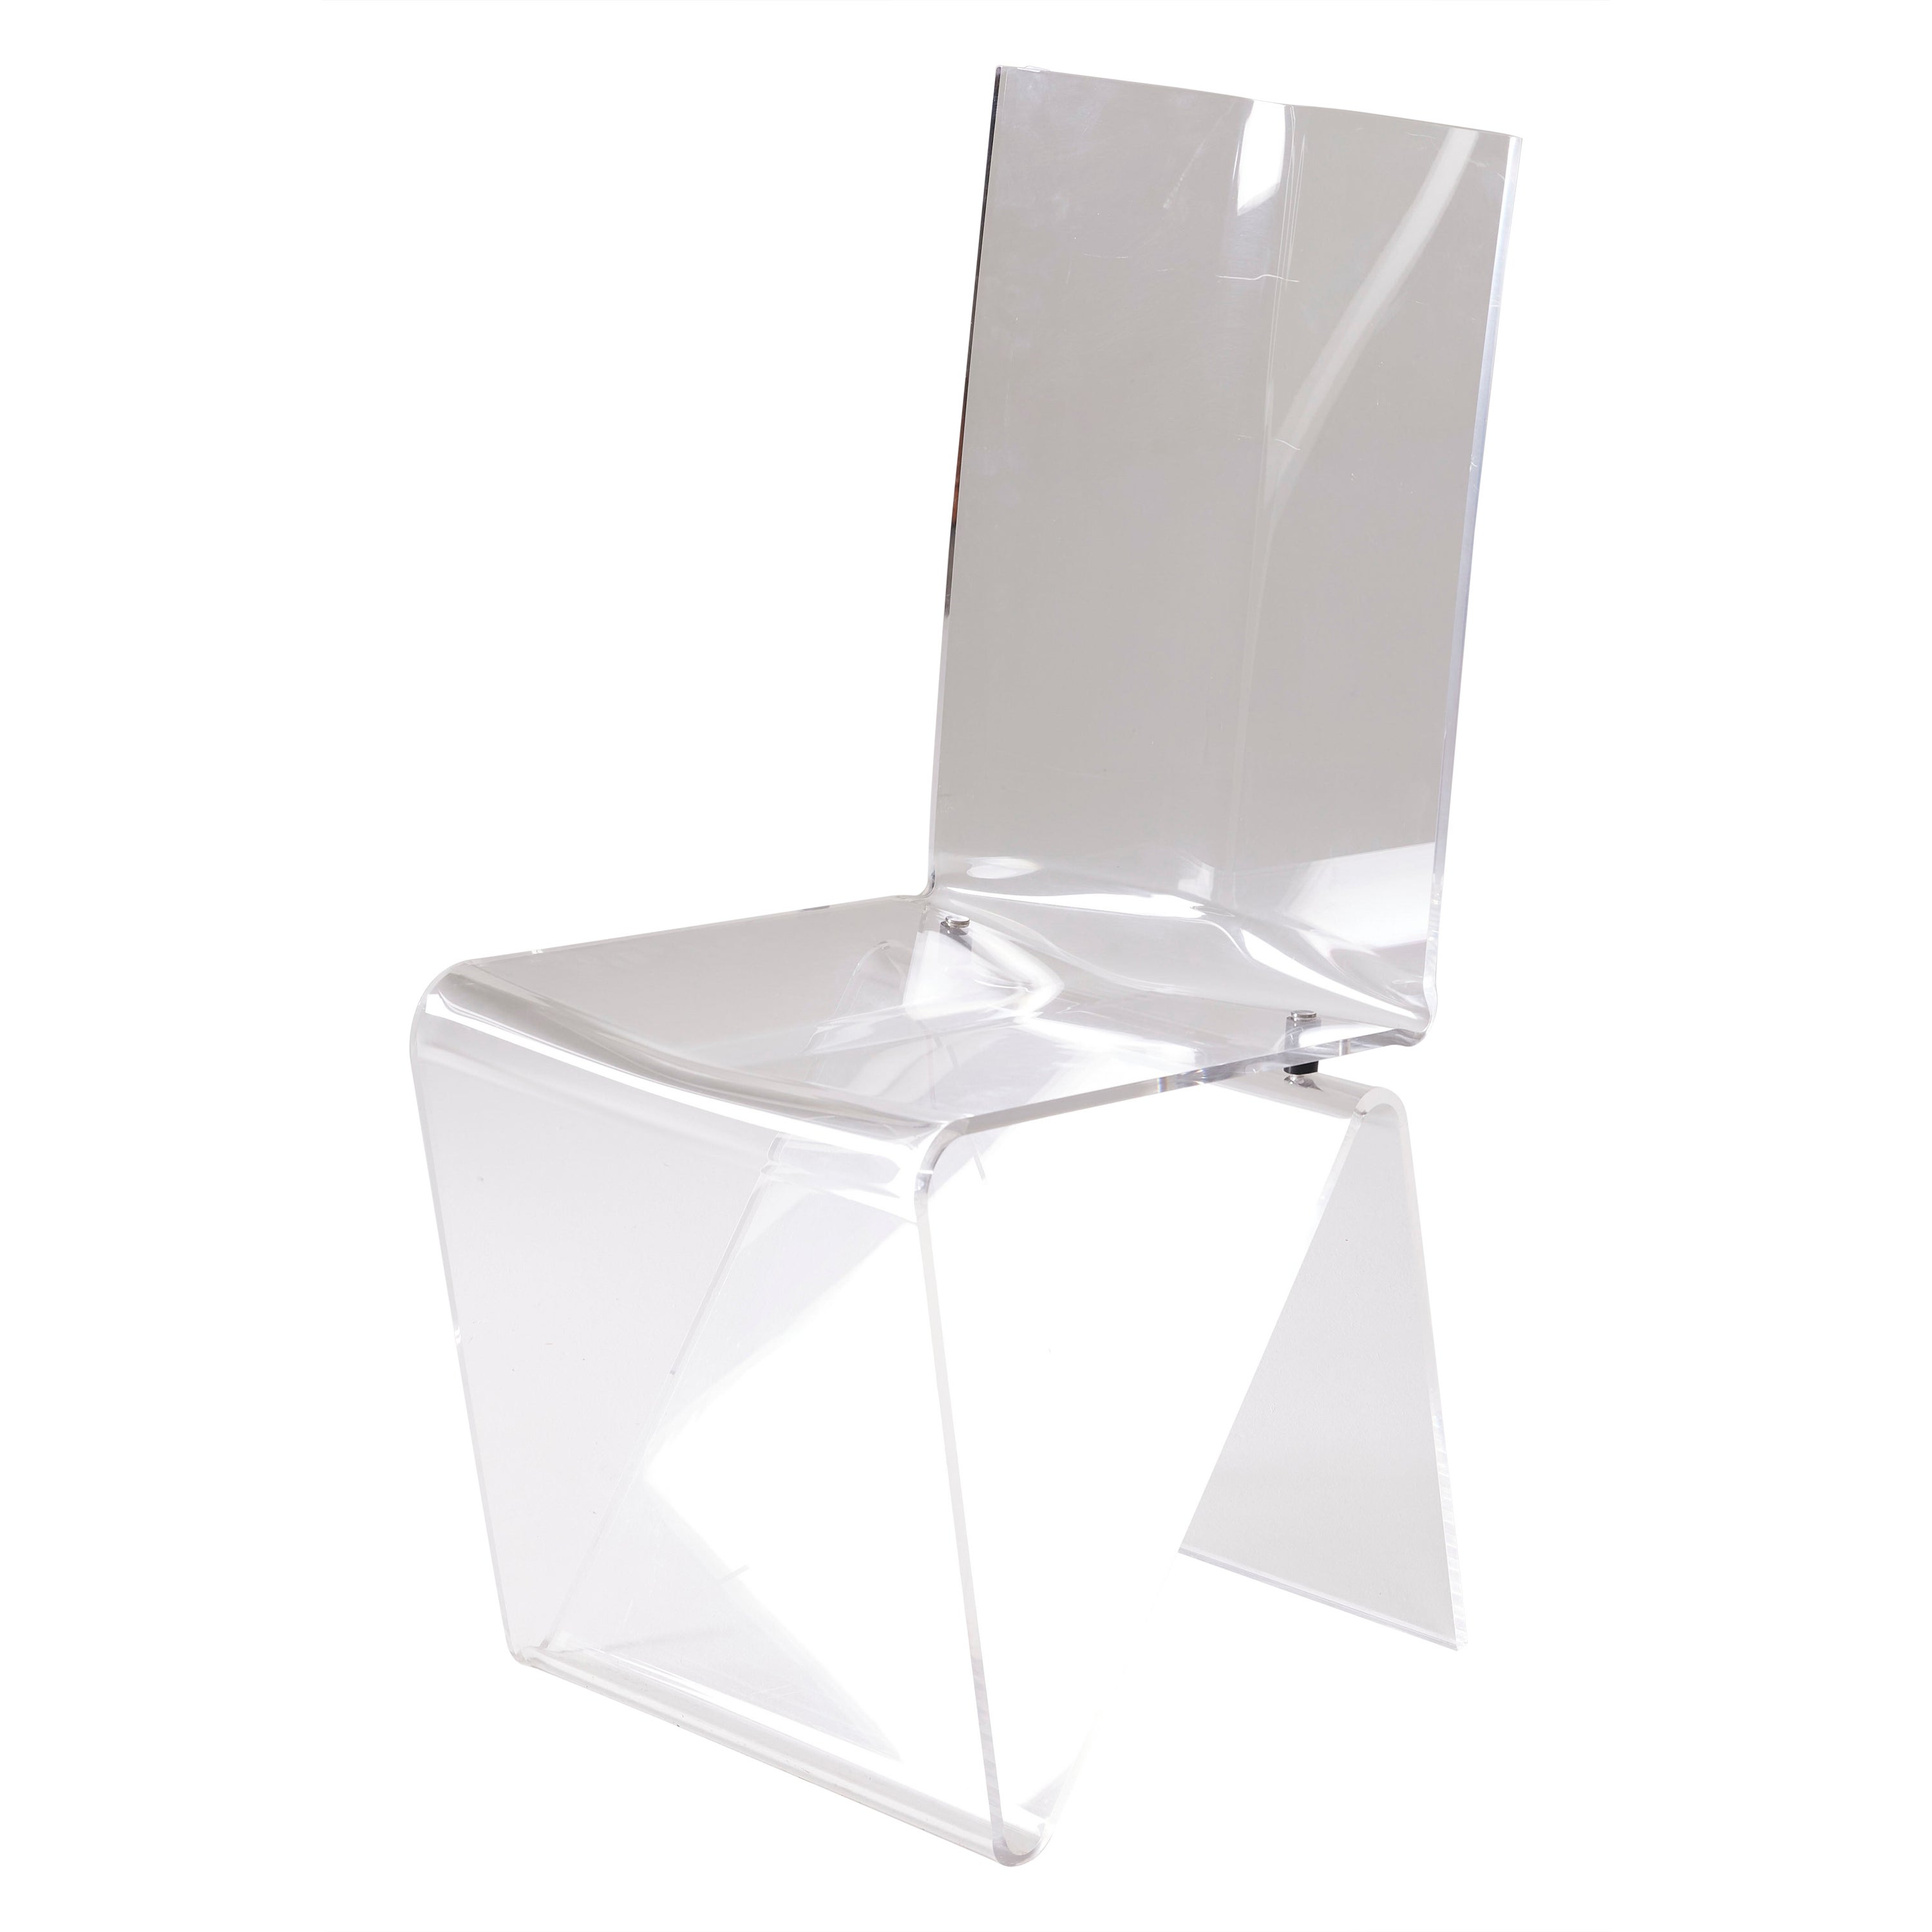 Plexiglass chair by Maurice Marty